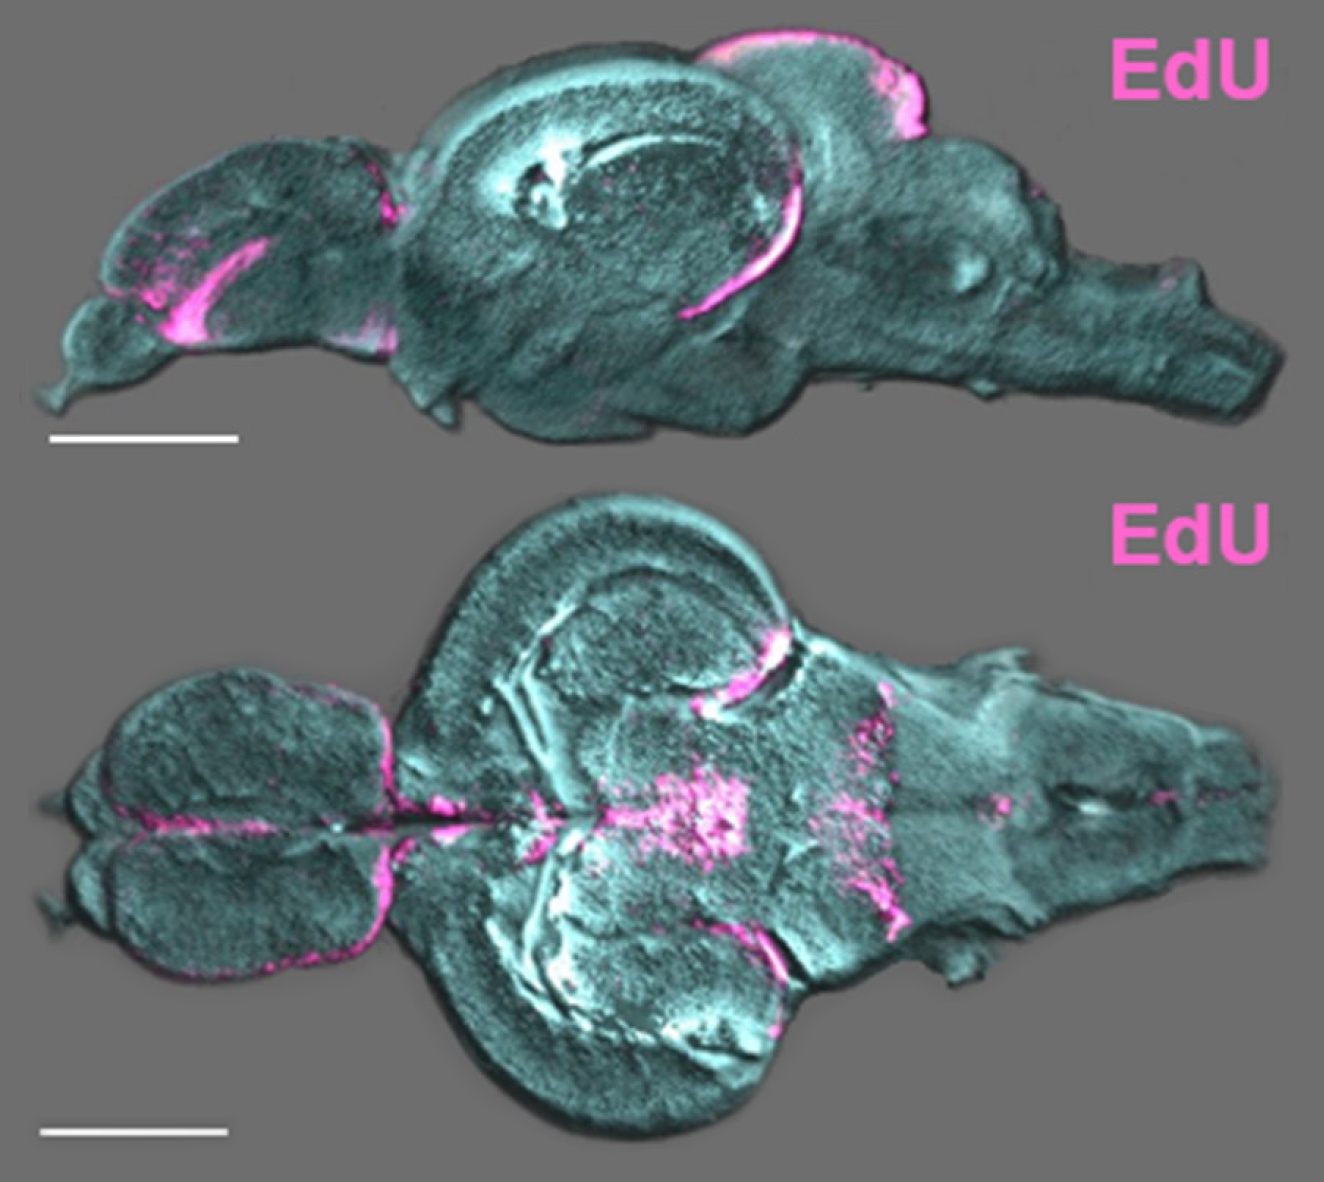 A Whole Brain Staining, Embedding, and Clearing Pipeline for Adult Zebrafish to Visualize Cell Proliferation and Morphology in 3-Dimensions